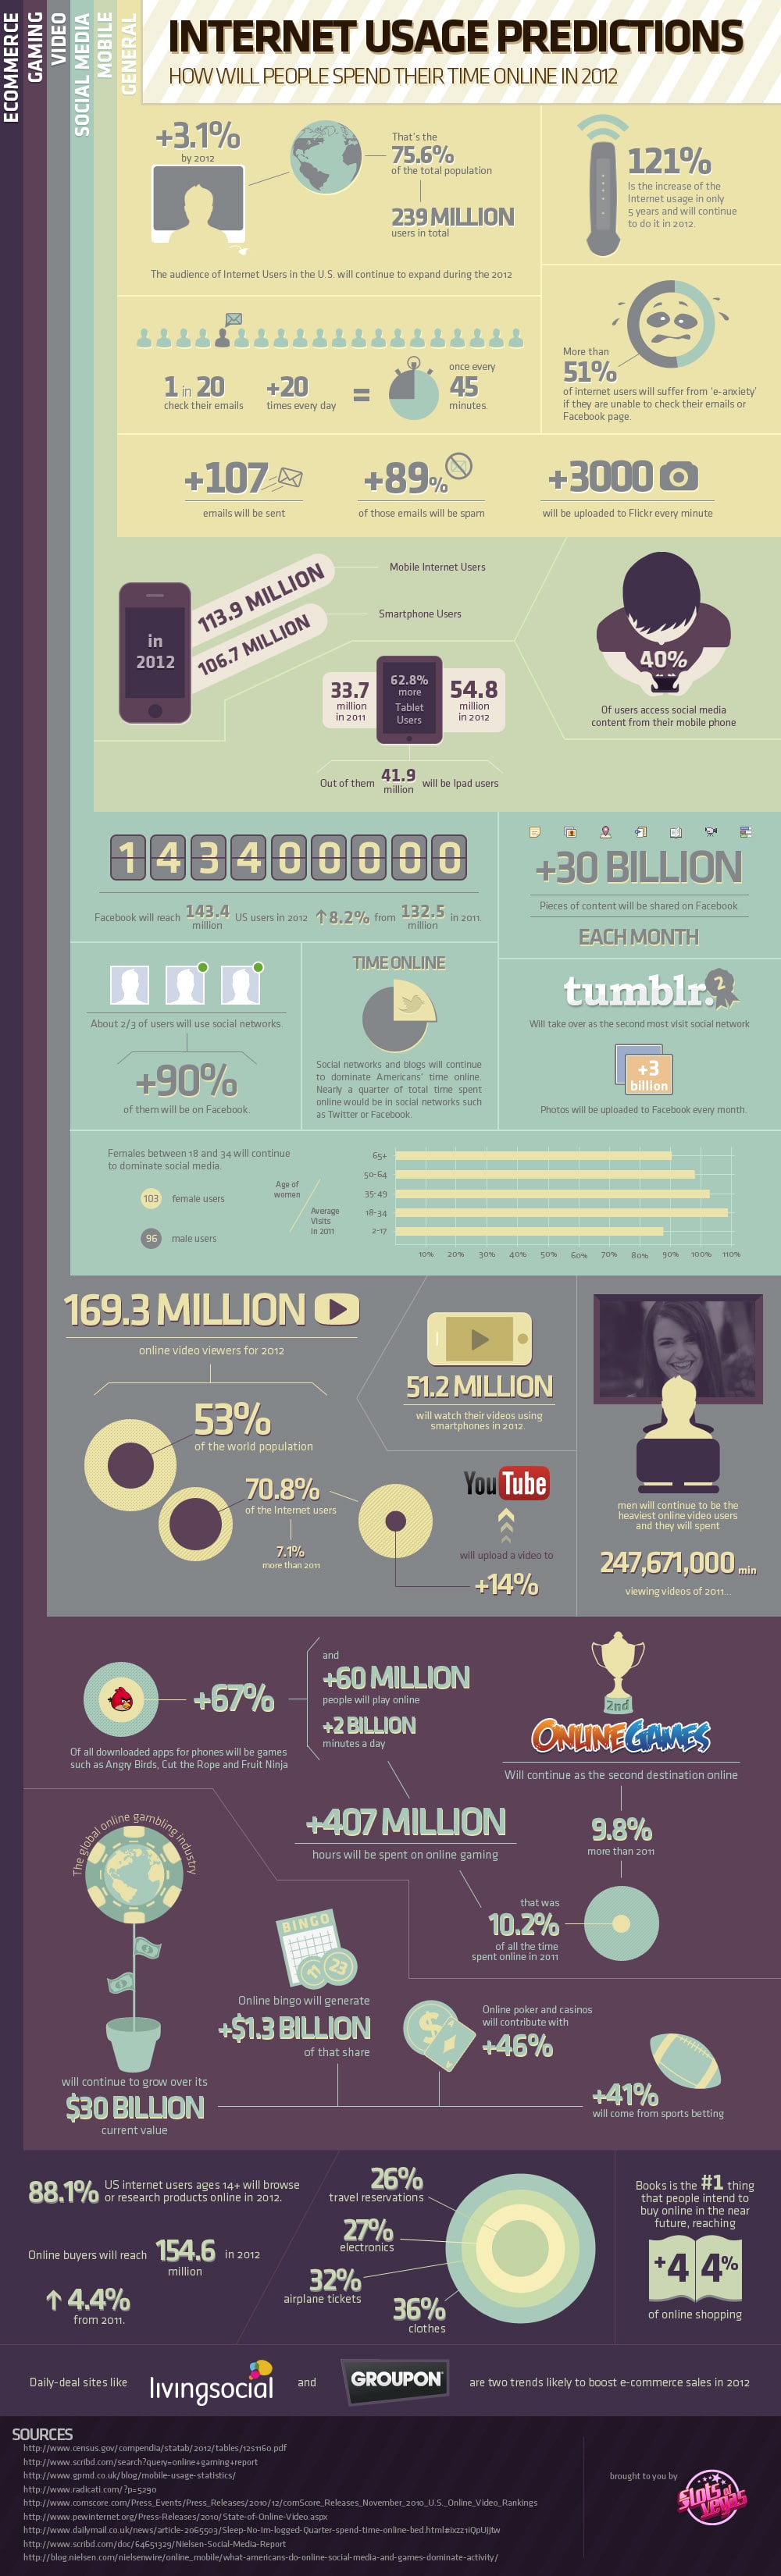 internet-usage-predictions-2012-infographic